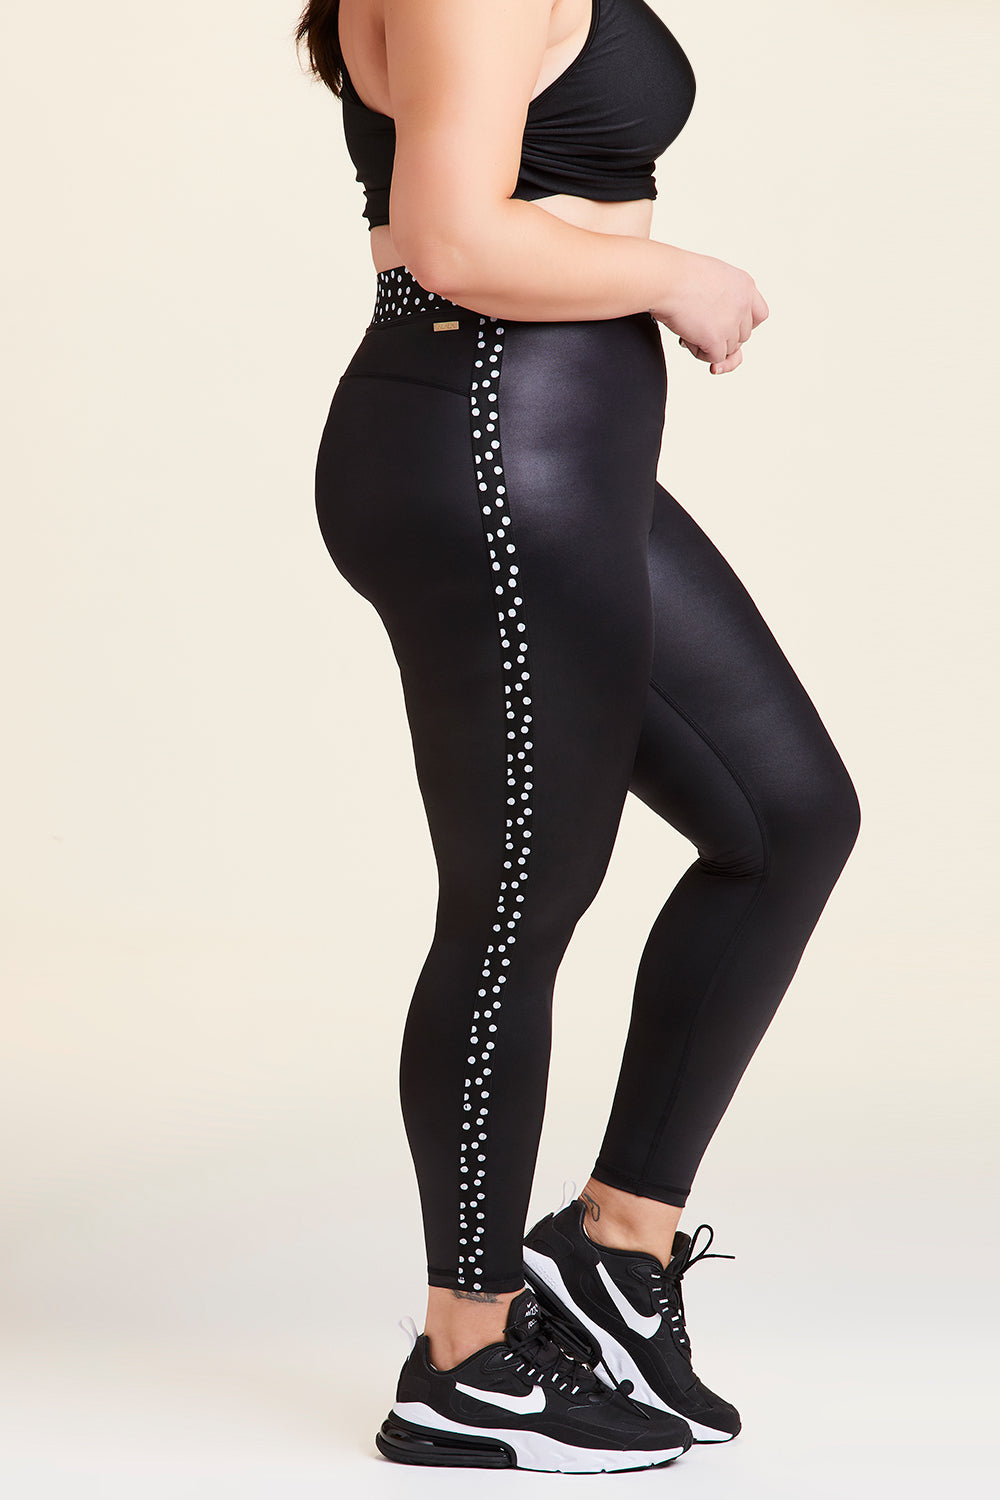 Side view of Alala Women's Luxury Athleisure shiny black tight with black and white polda dot detail on waistband and side seams in plus size